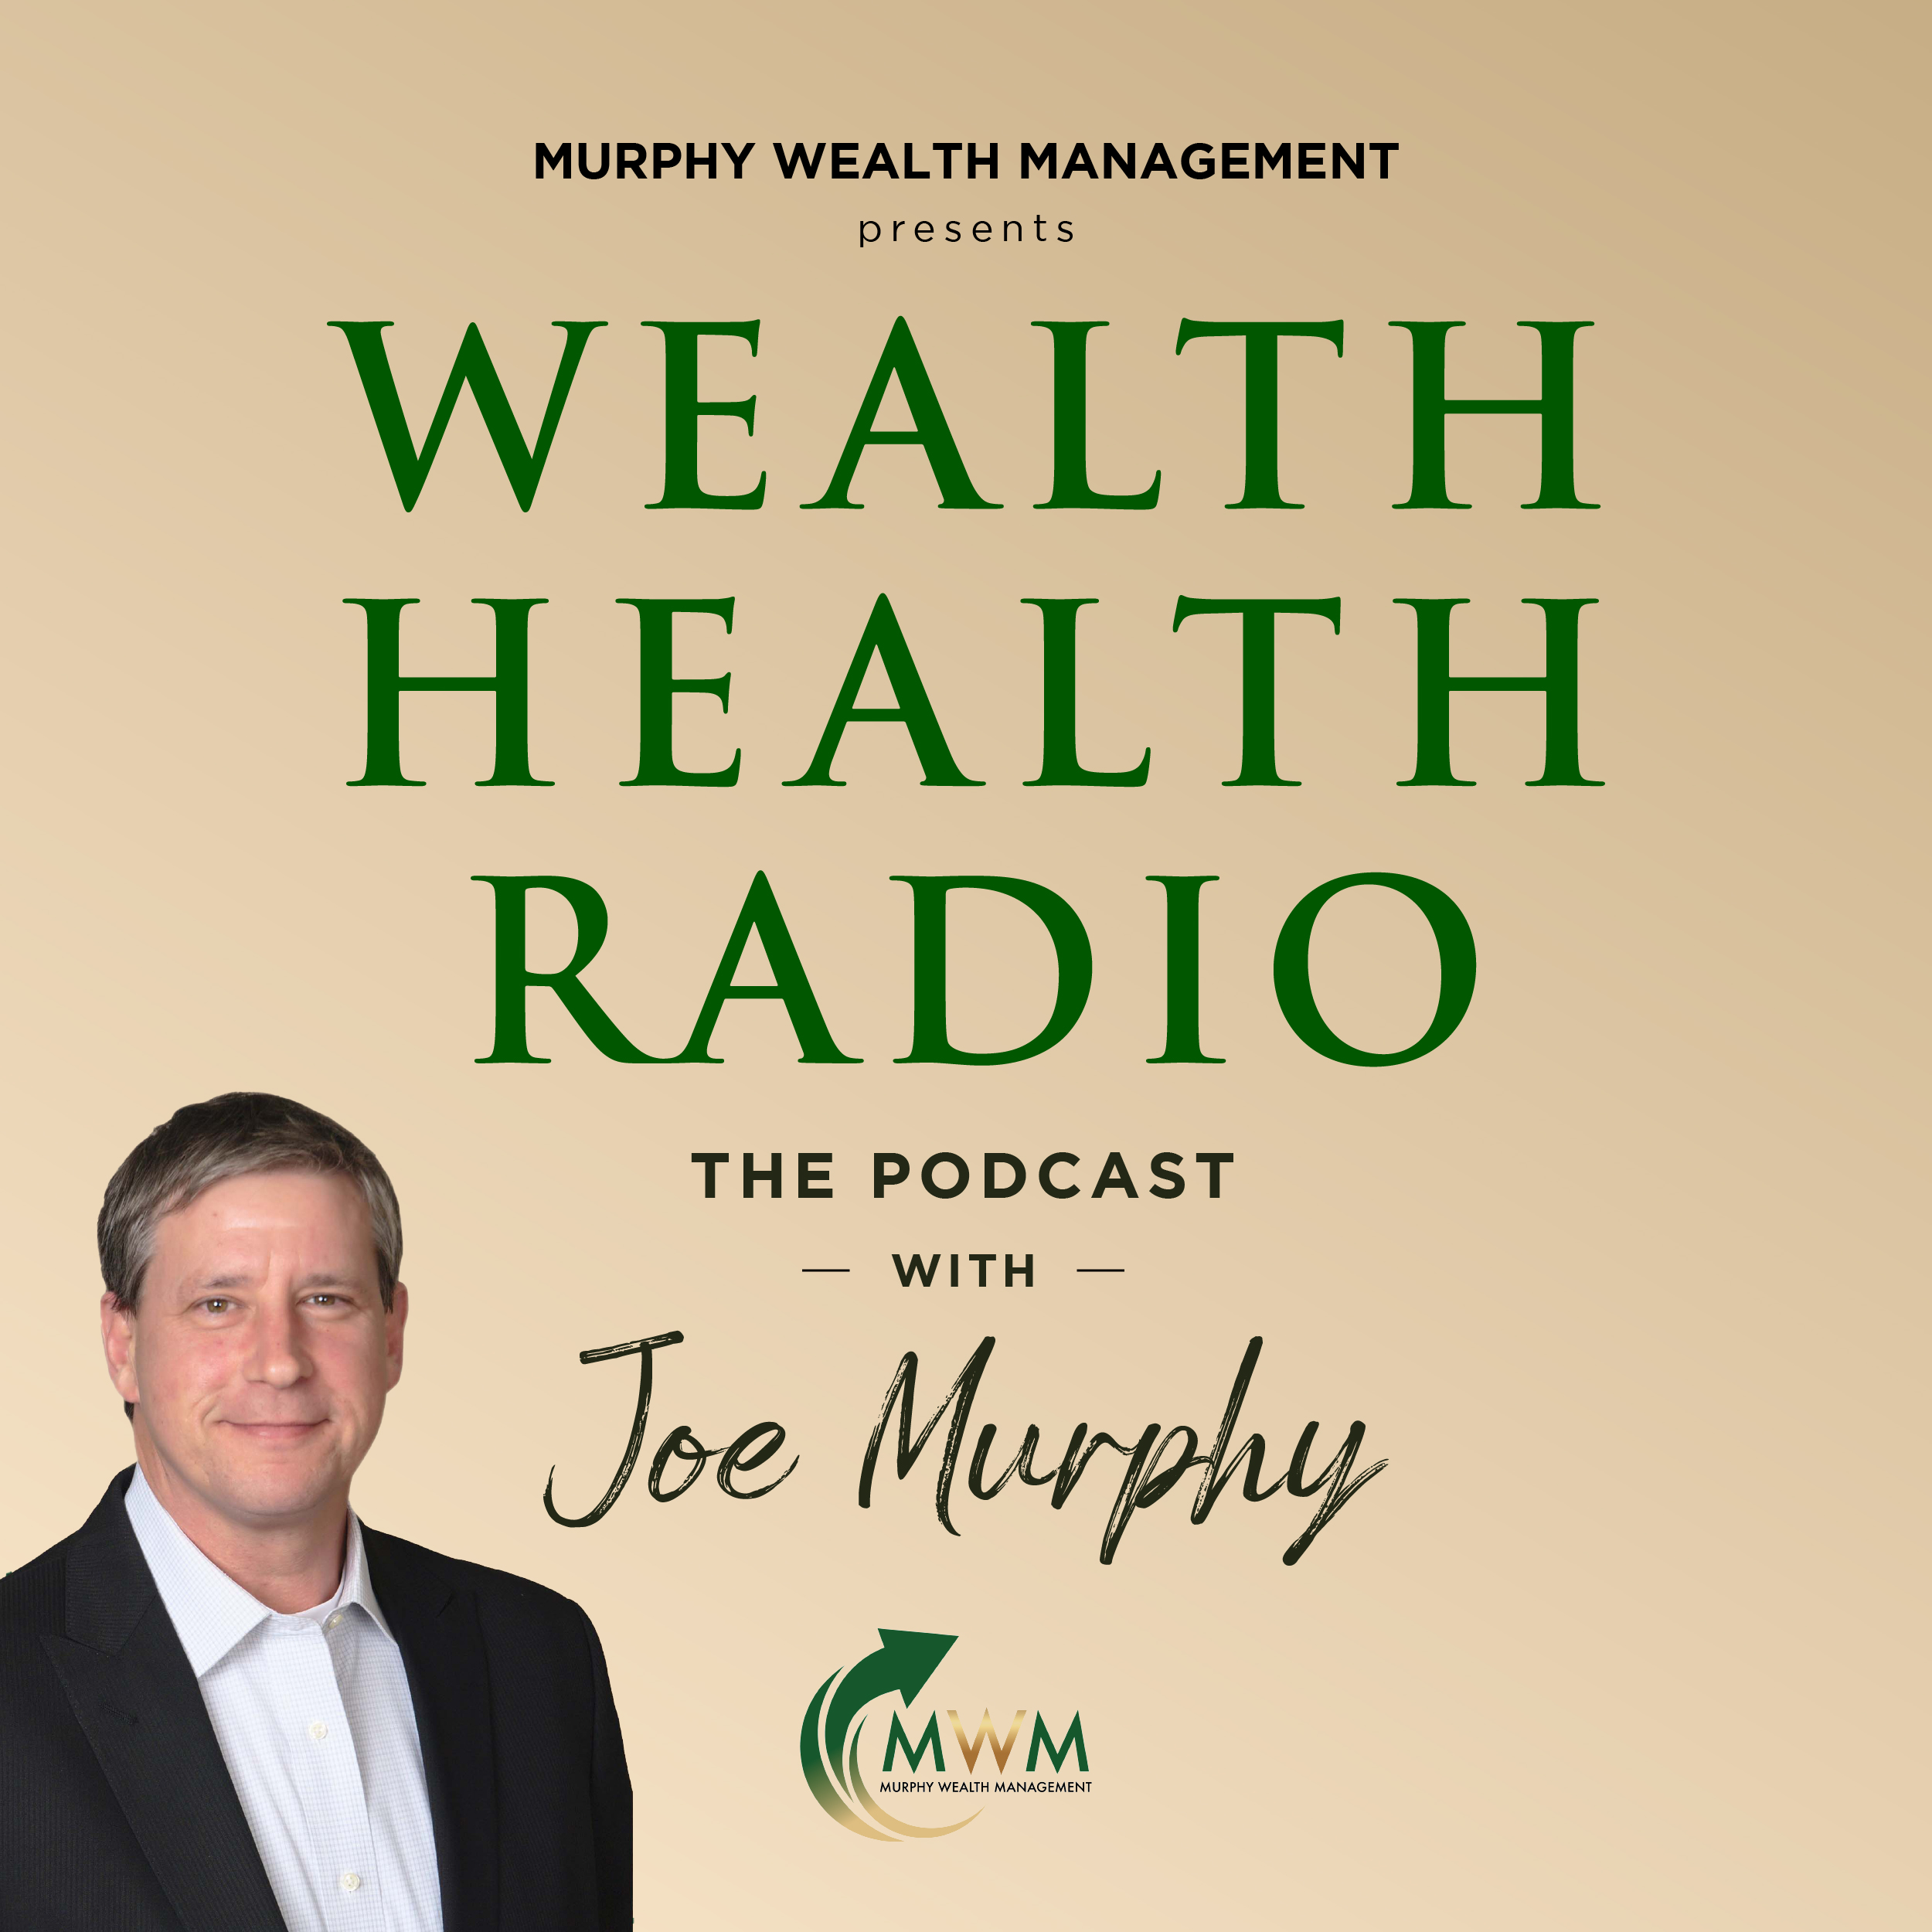 Wealth Health Radio his week Joe Murphy and special guest Medicare plan expert and independent broker Carol Van Noort discuss the process and offers some strategies to make sure you get the right Medicare plan for you.